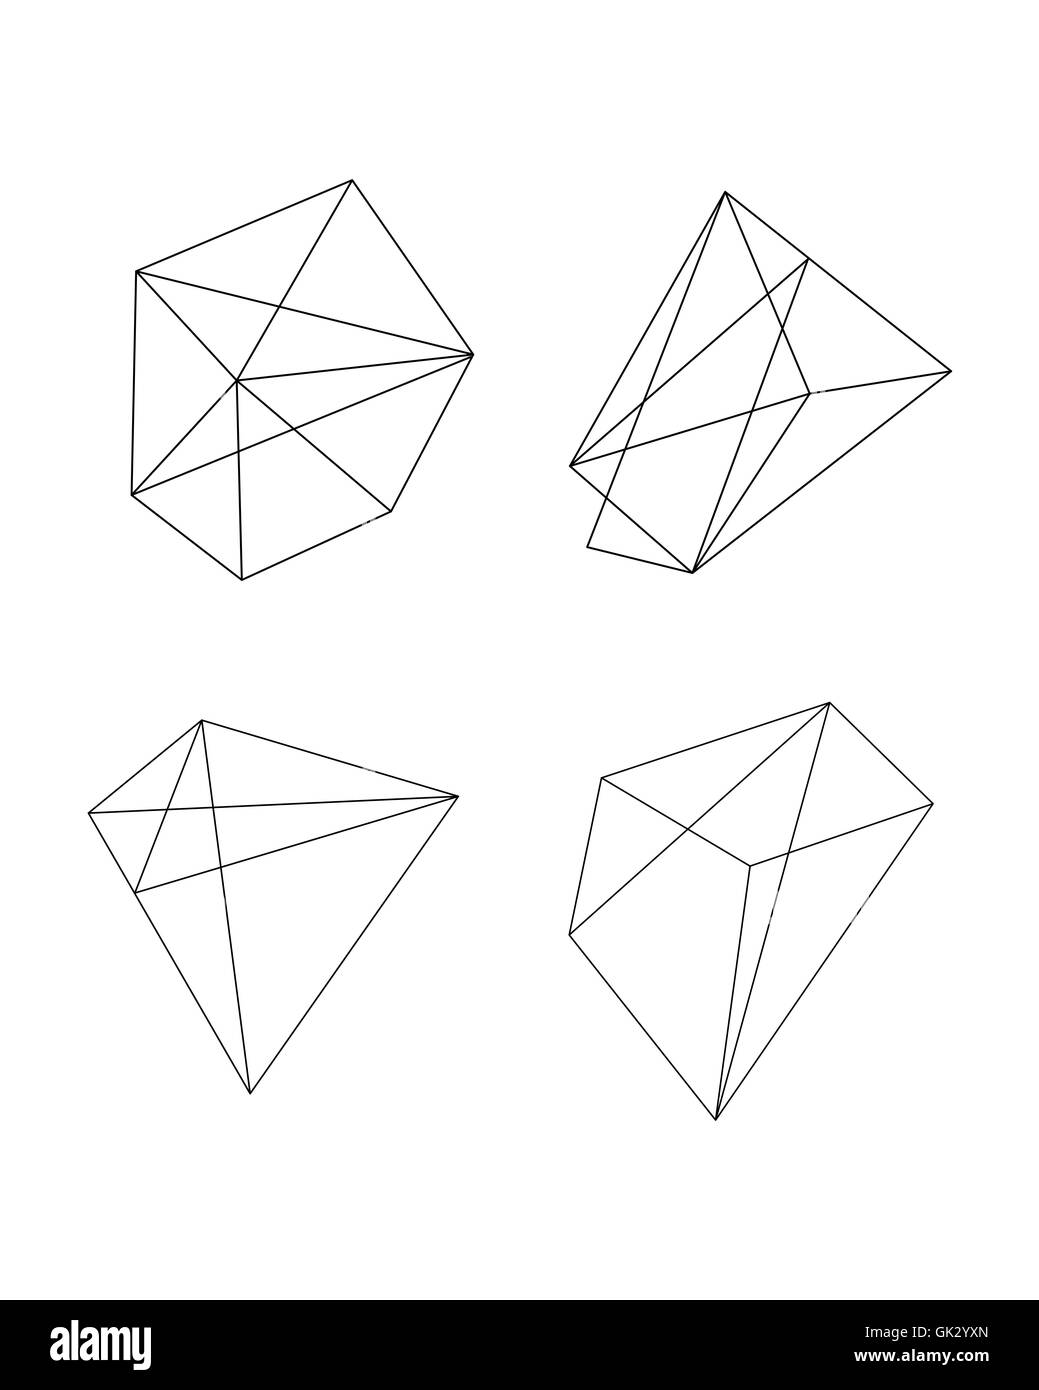 Vector illustration or drawing of different polygonal geometric abstract forms Stock Photo